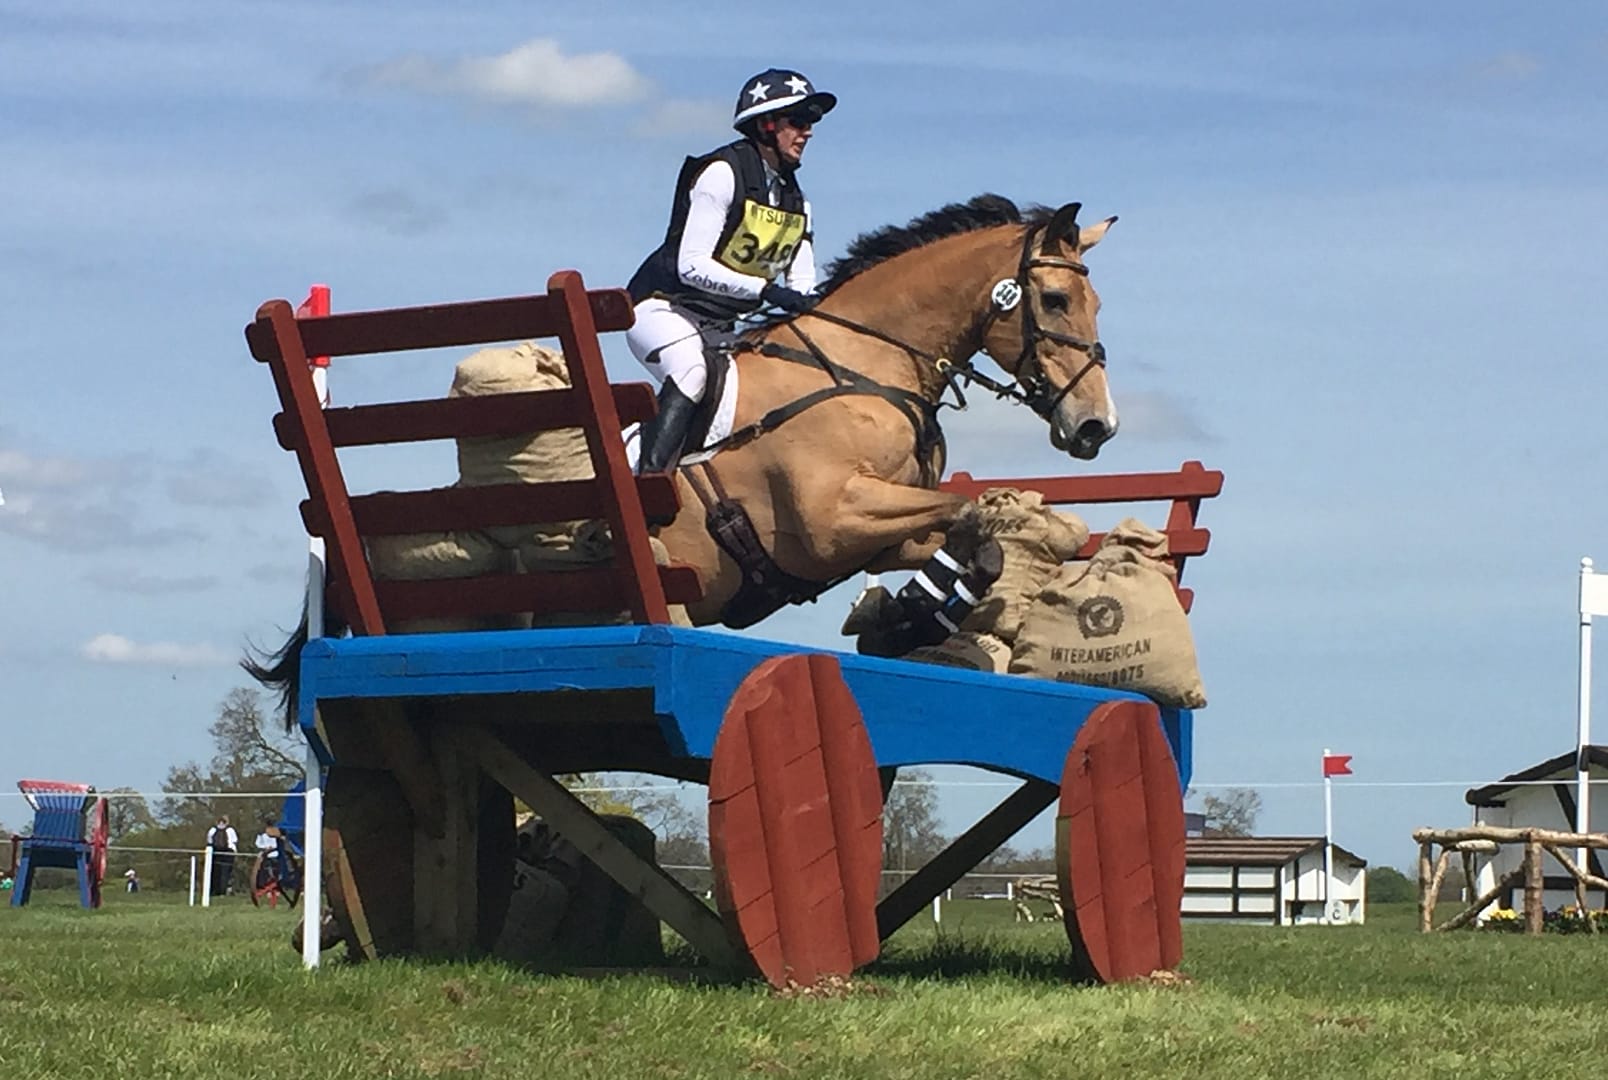 A horse and rider jump over a blue and brown wooden cart at Badminton Horse Trials.